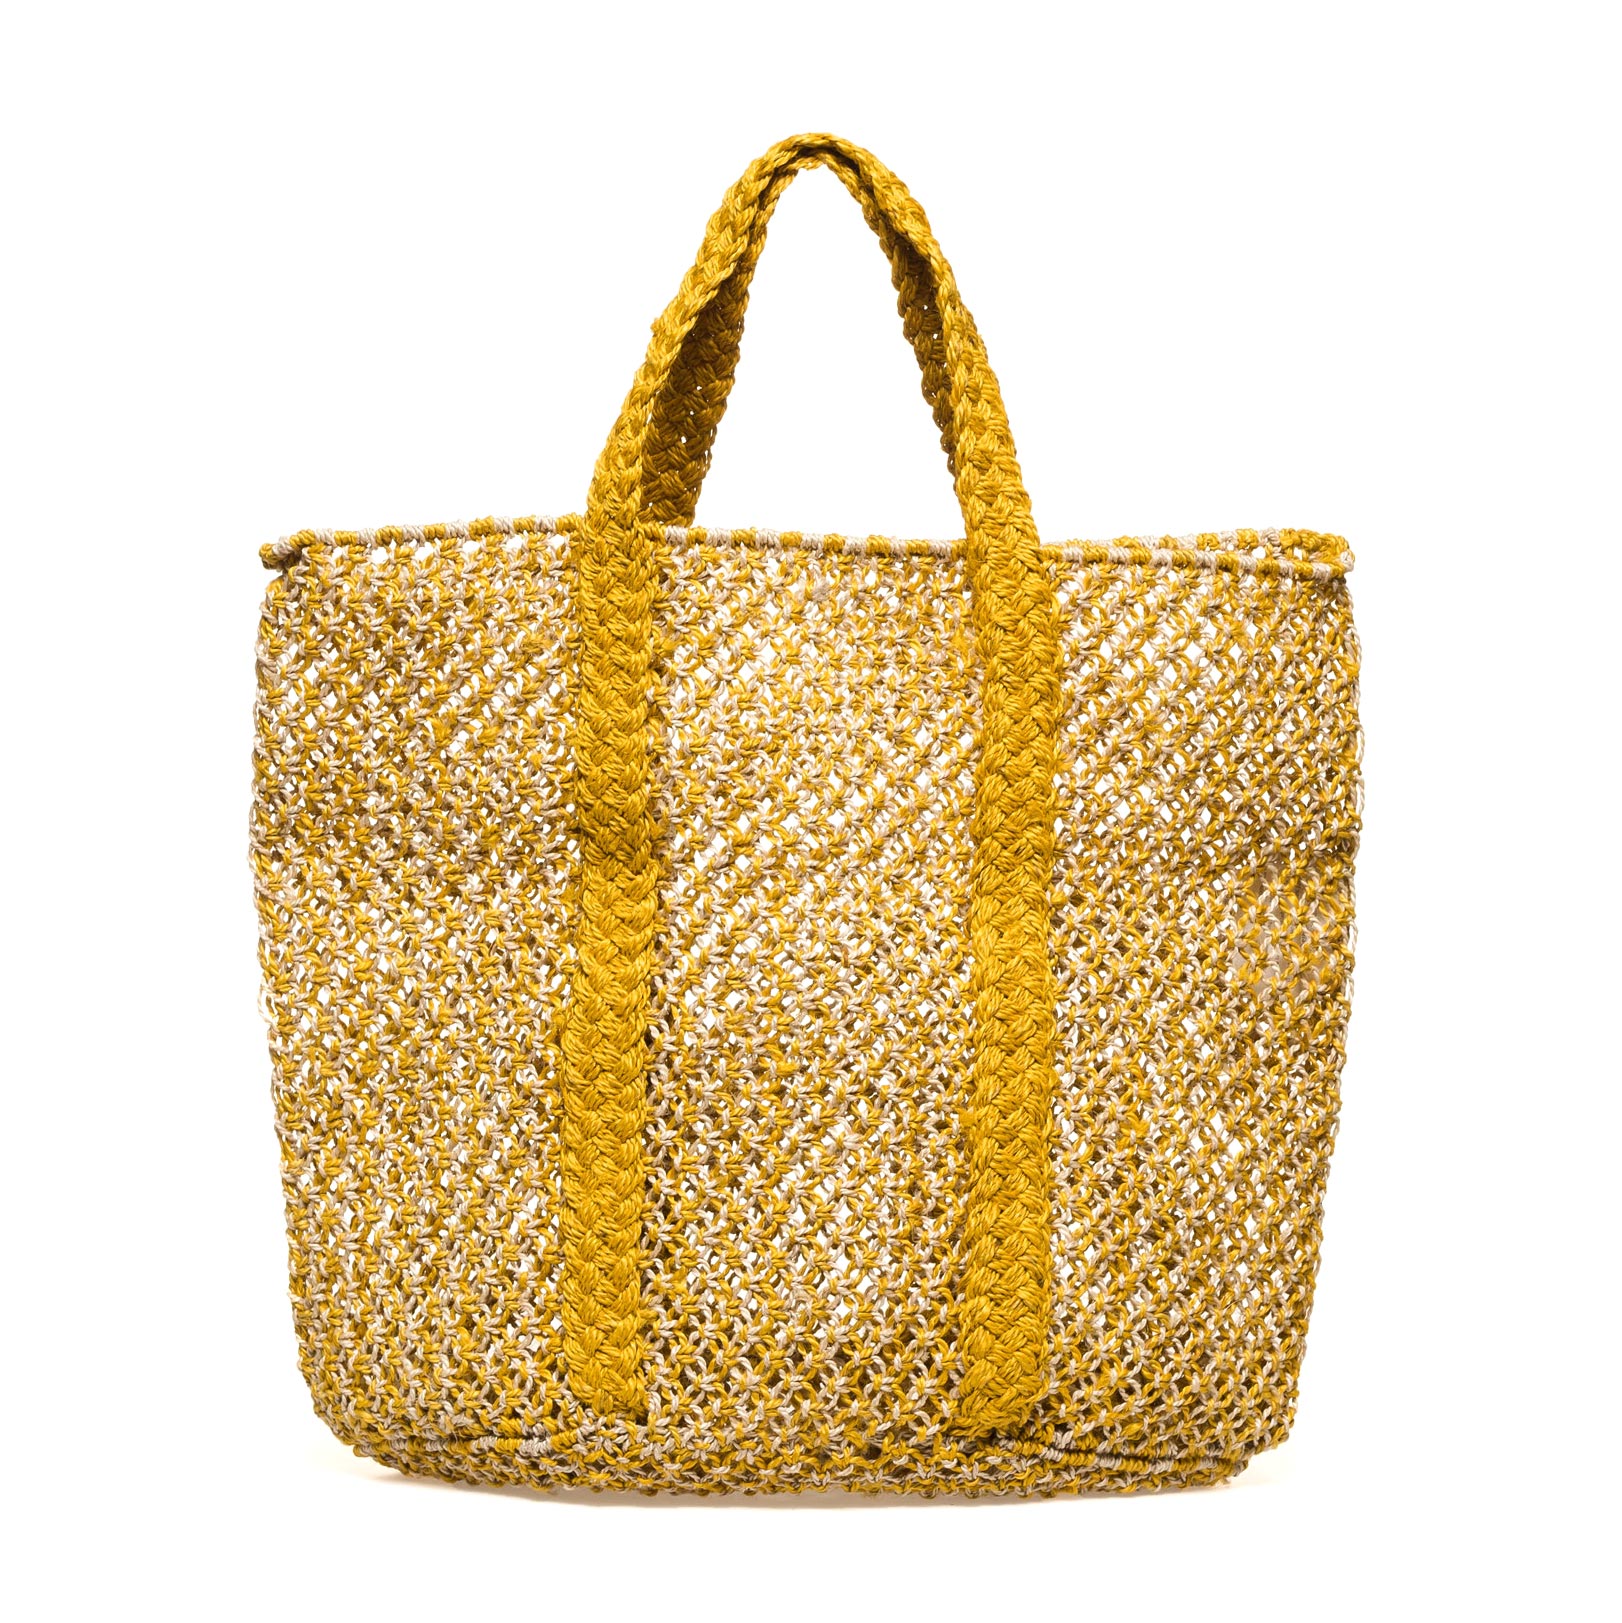 The Jacksons Yellow Connie Basket